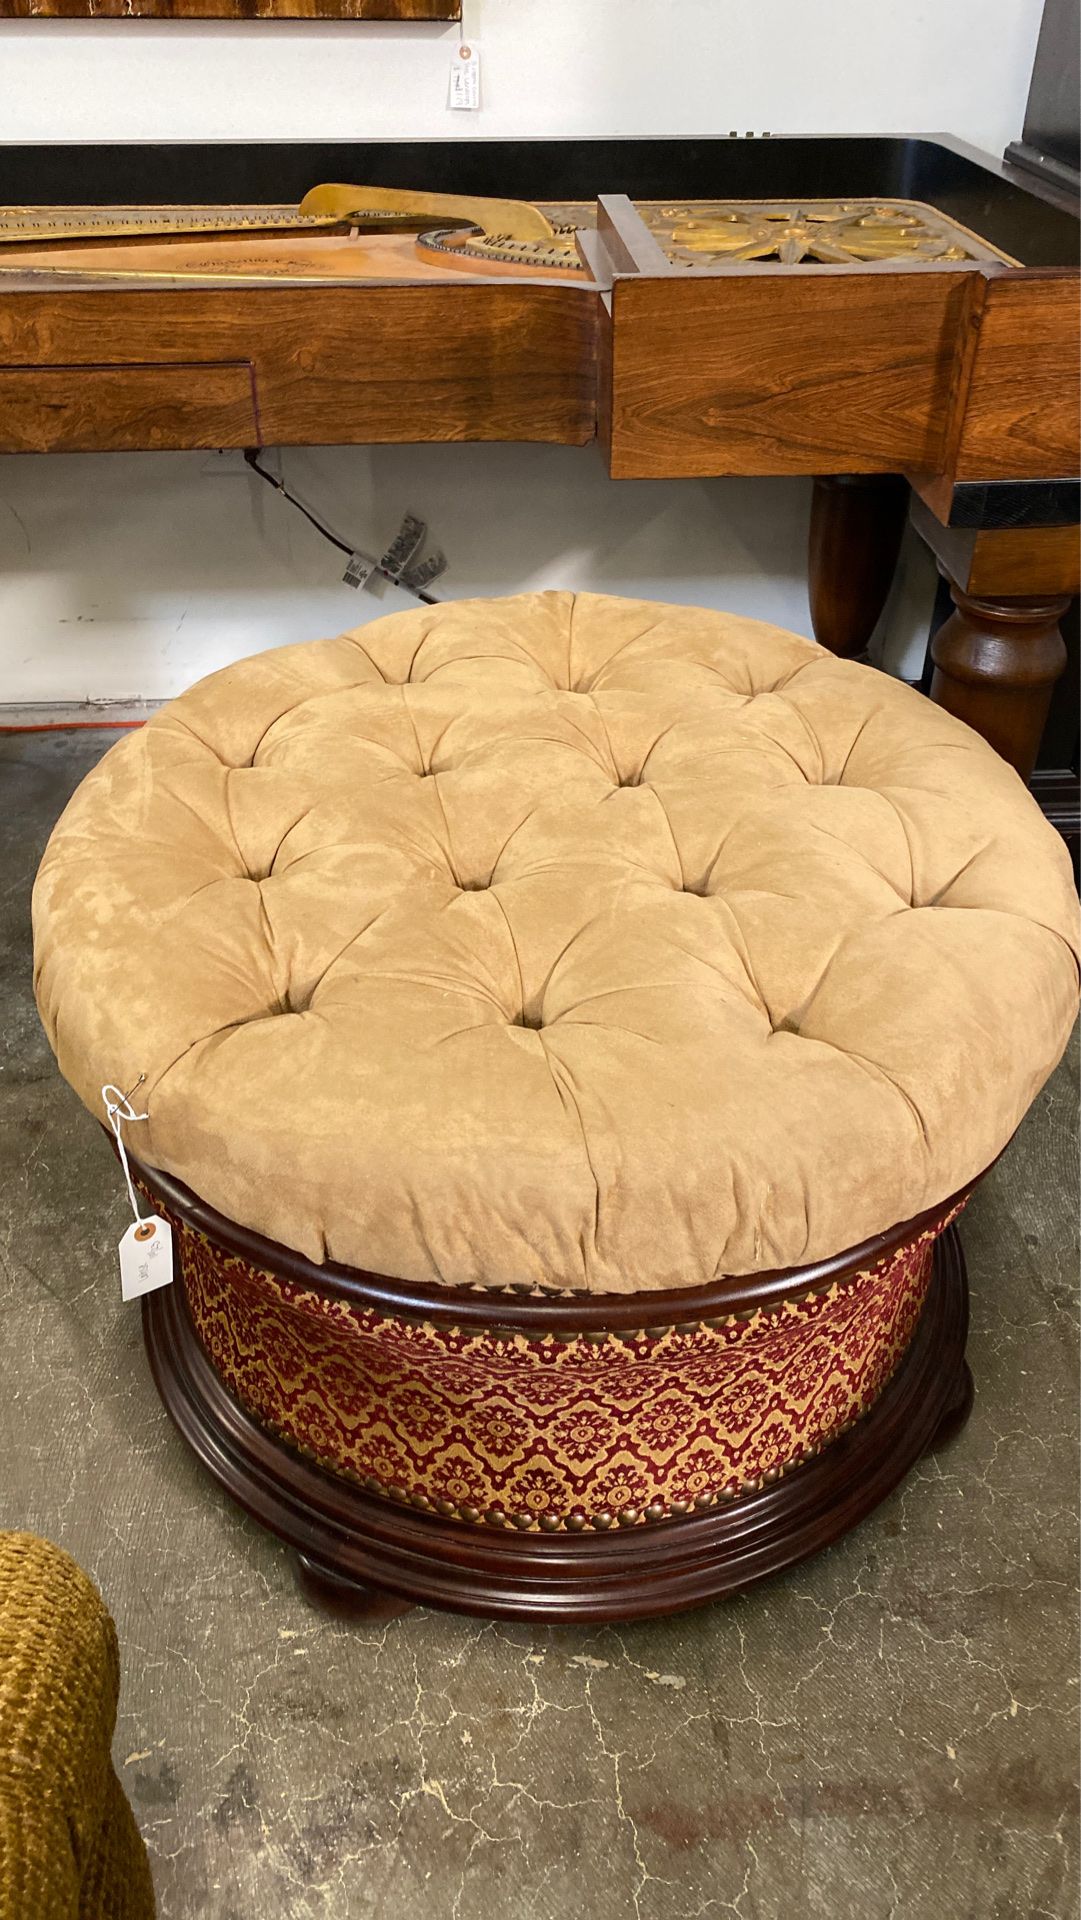 Round tan and red upholstered ottoman